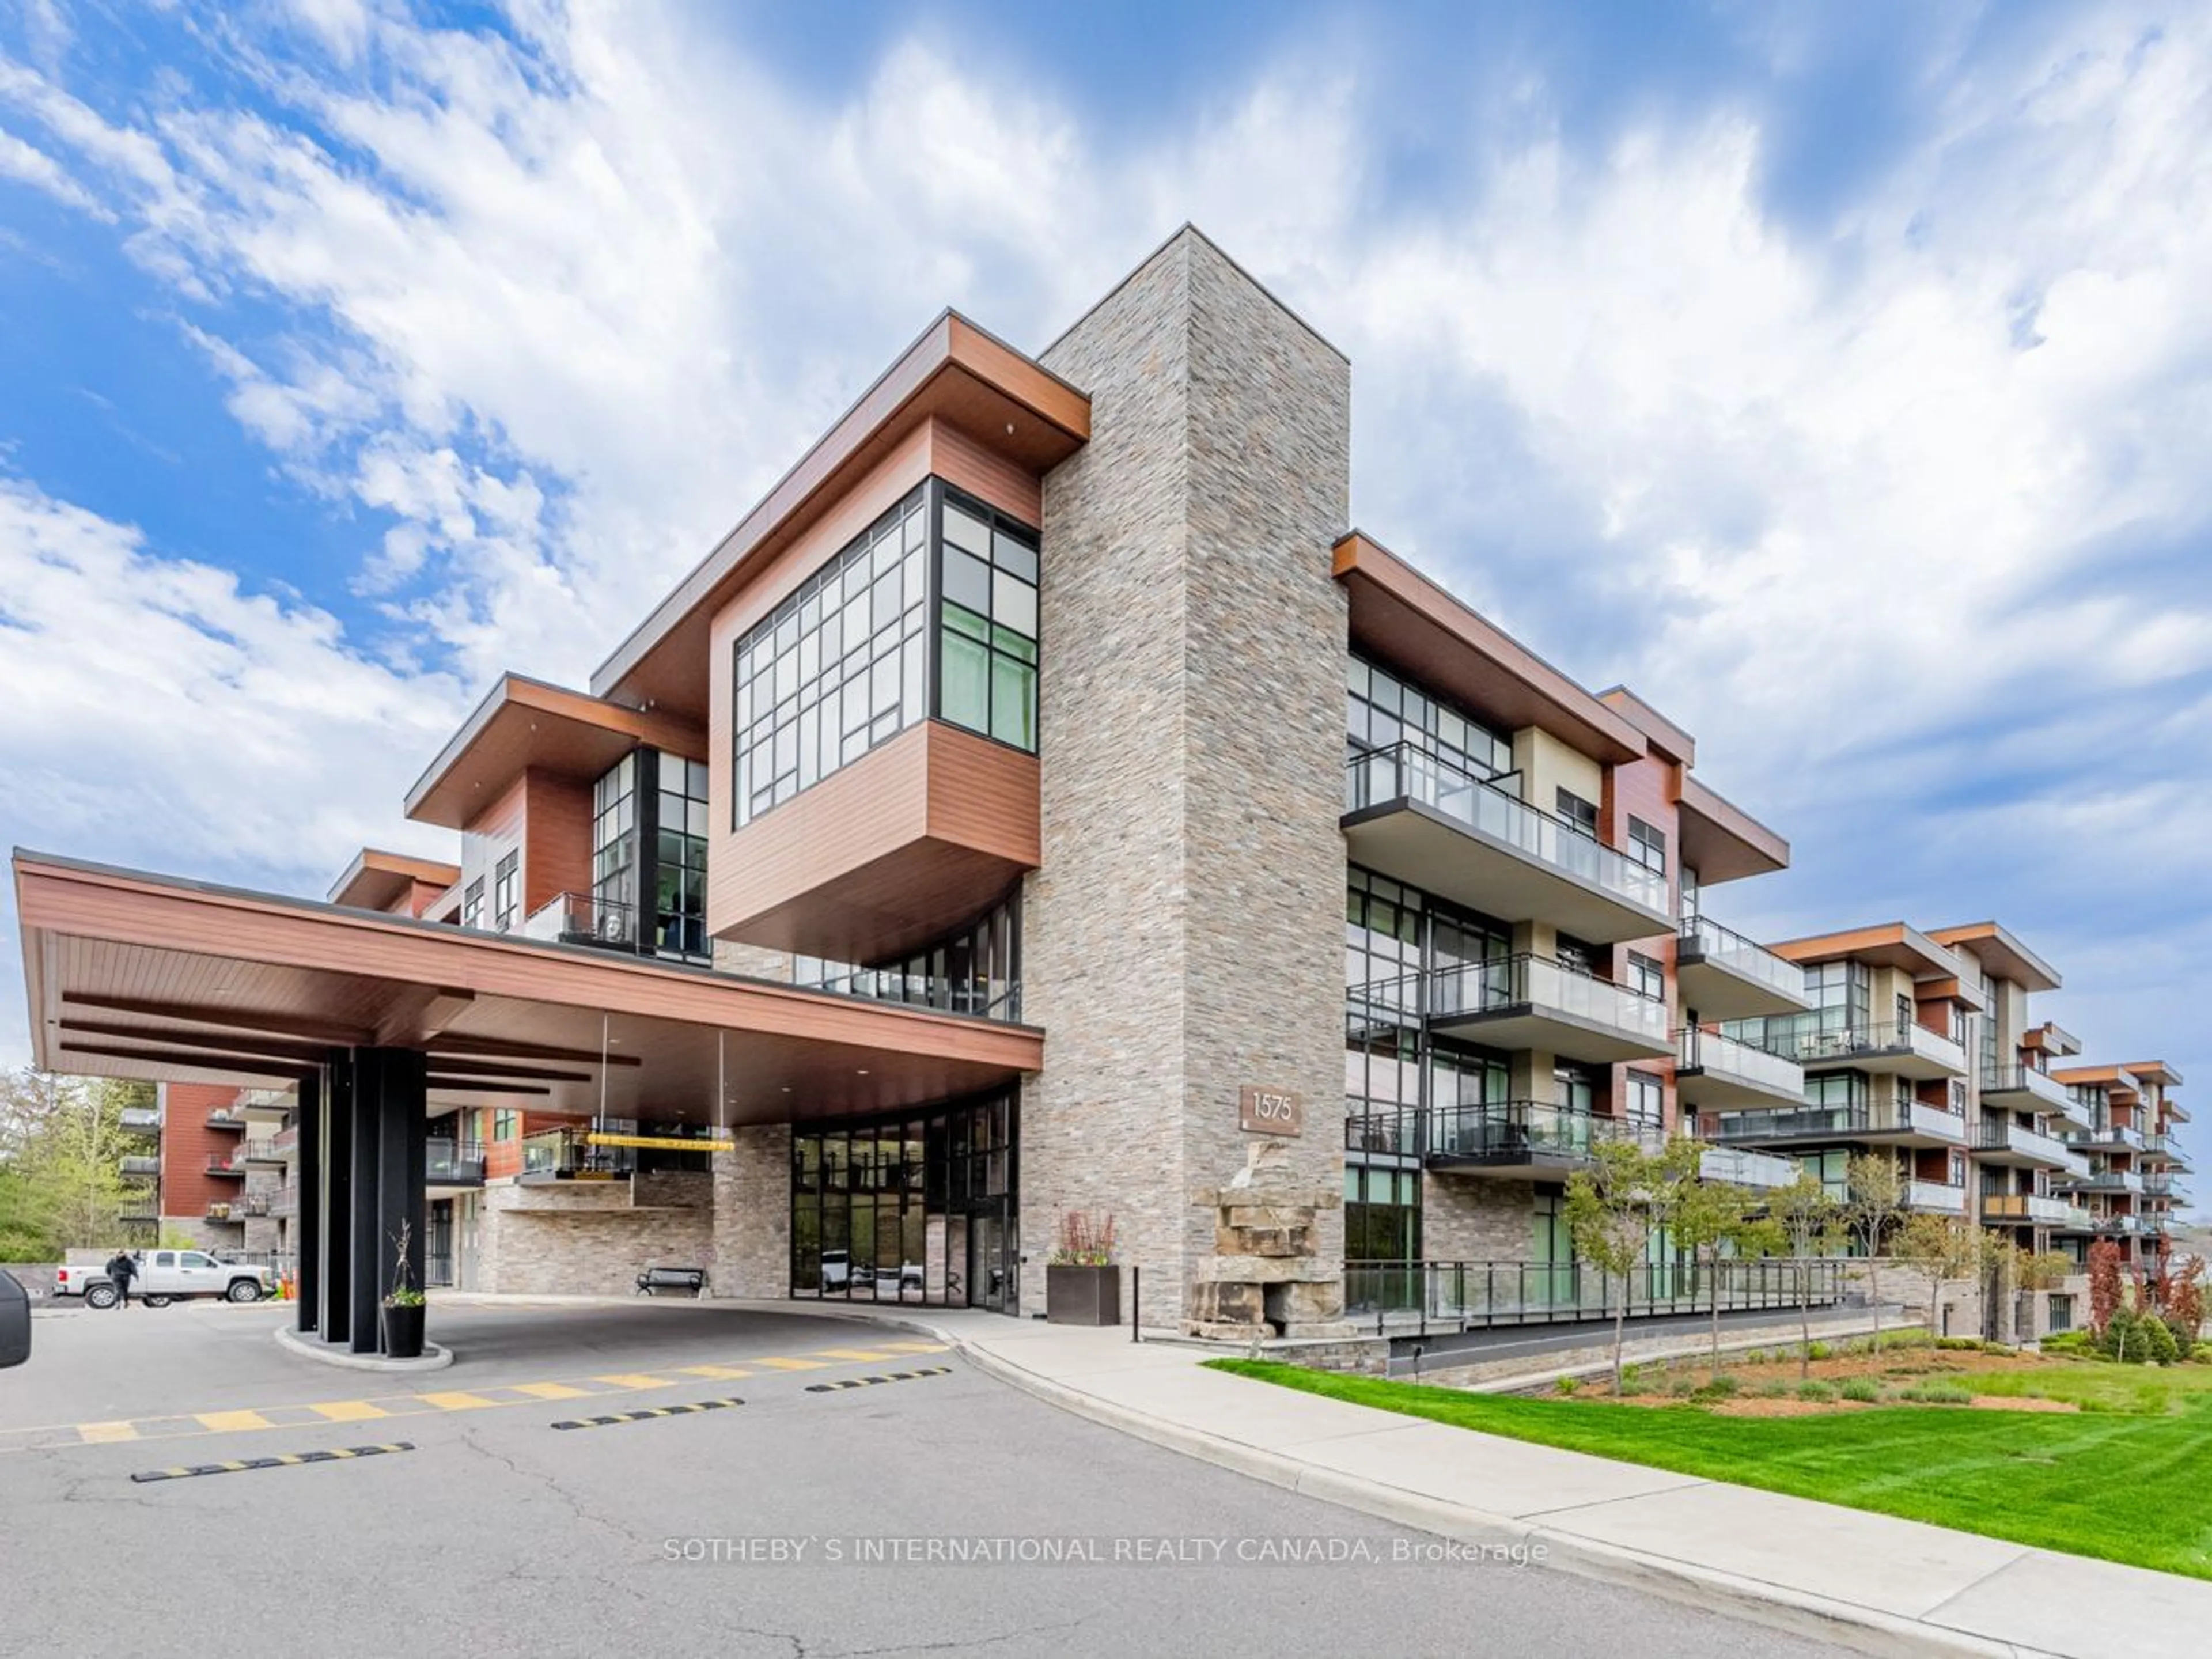 A pic from exterior of the house or condo for 1575 Lakeshore Rd #366, Mississauga Ontario L5J 0B1